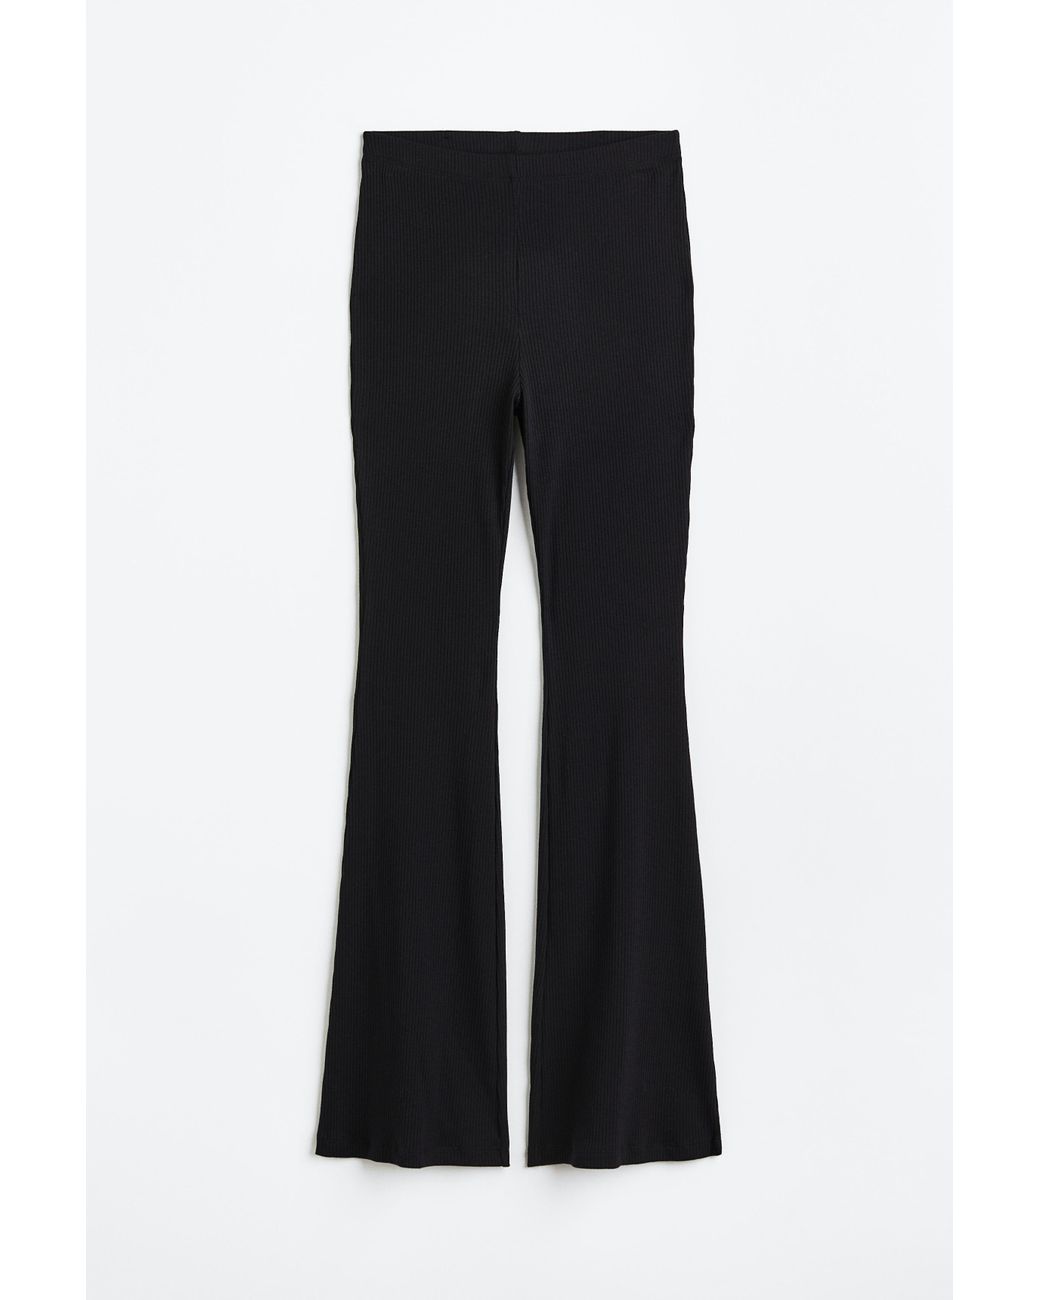 H&M Ribbed Jersey Jazz Trousers in Black | Lyst